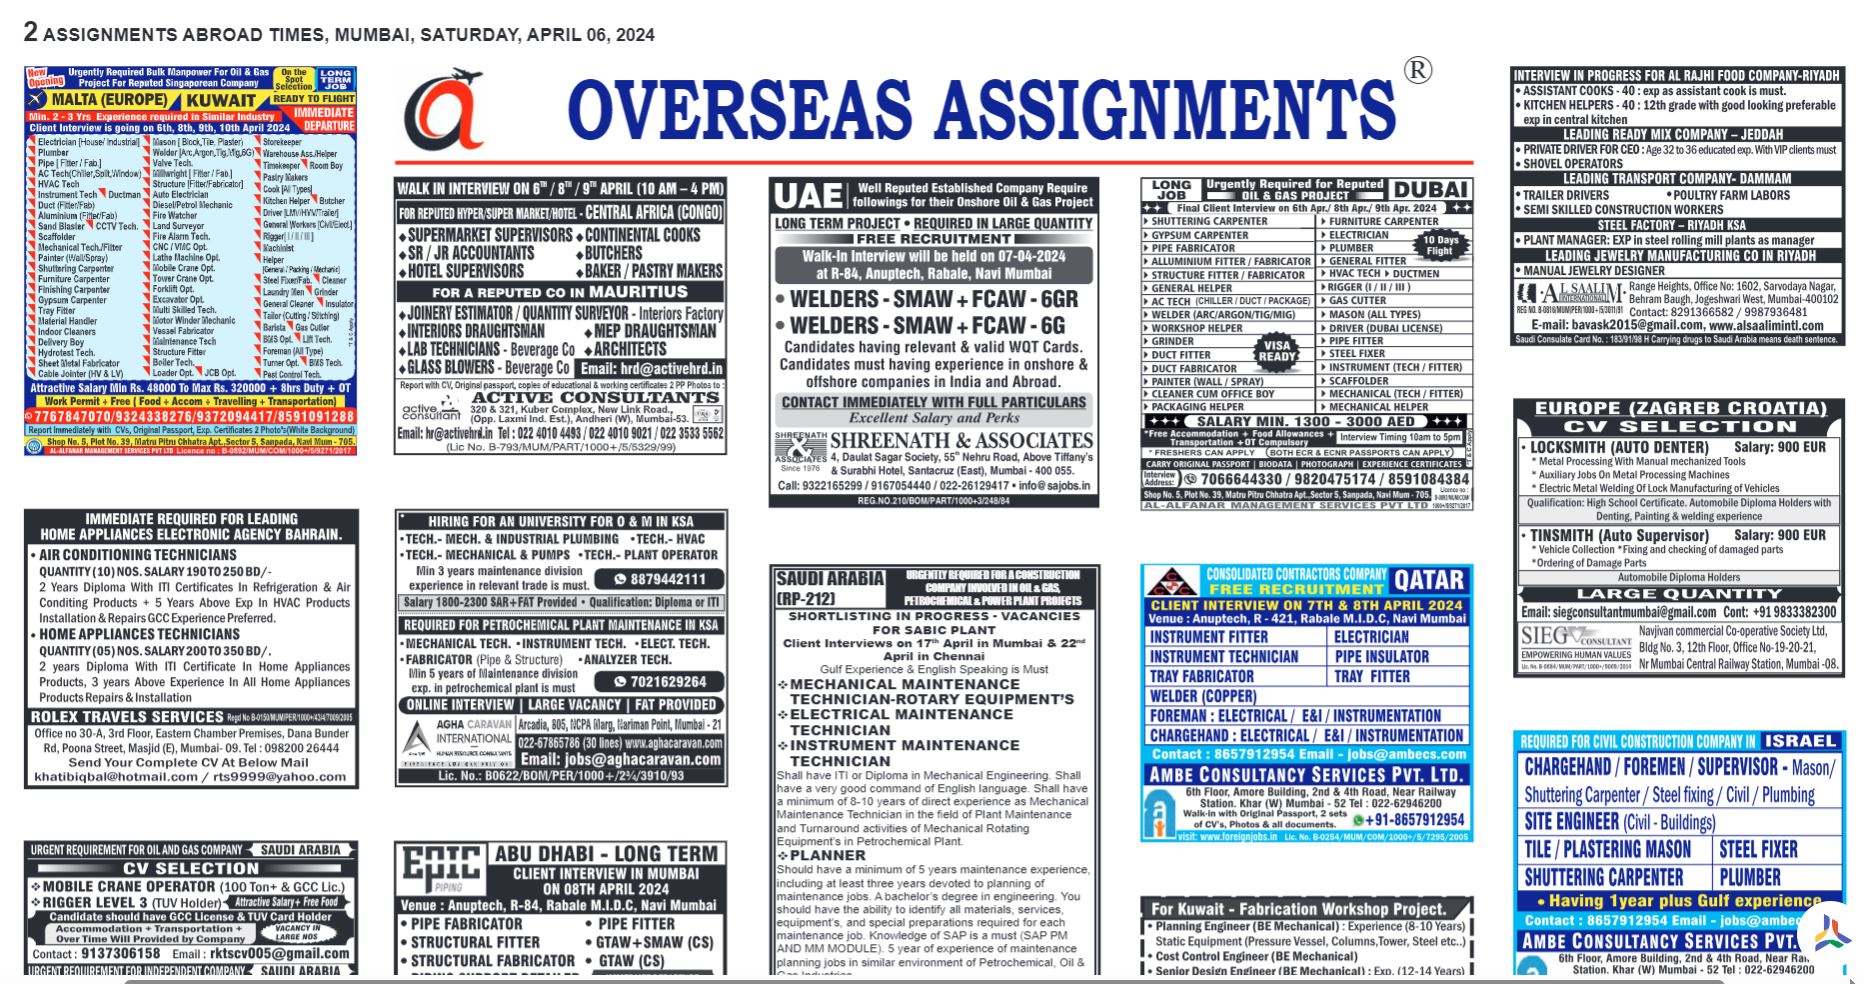 assignment abroad times 1 feb 2023